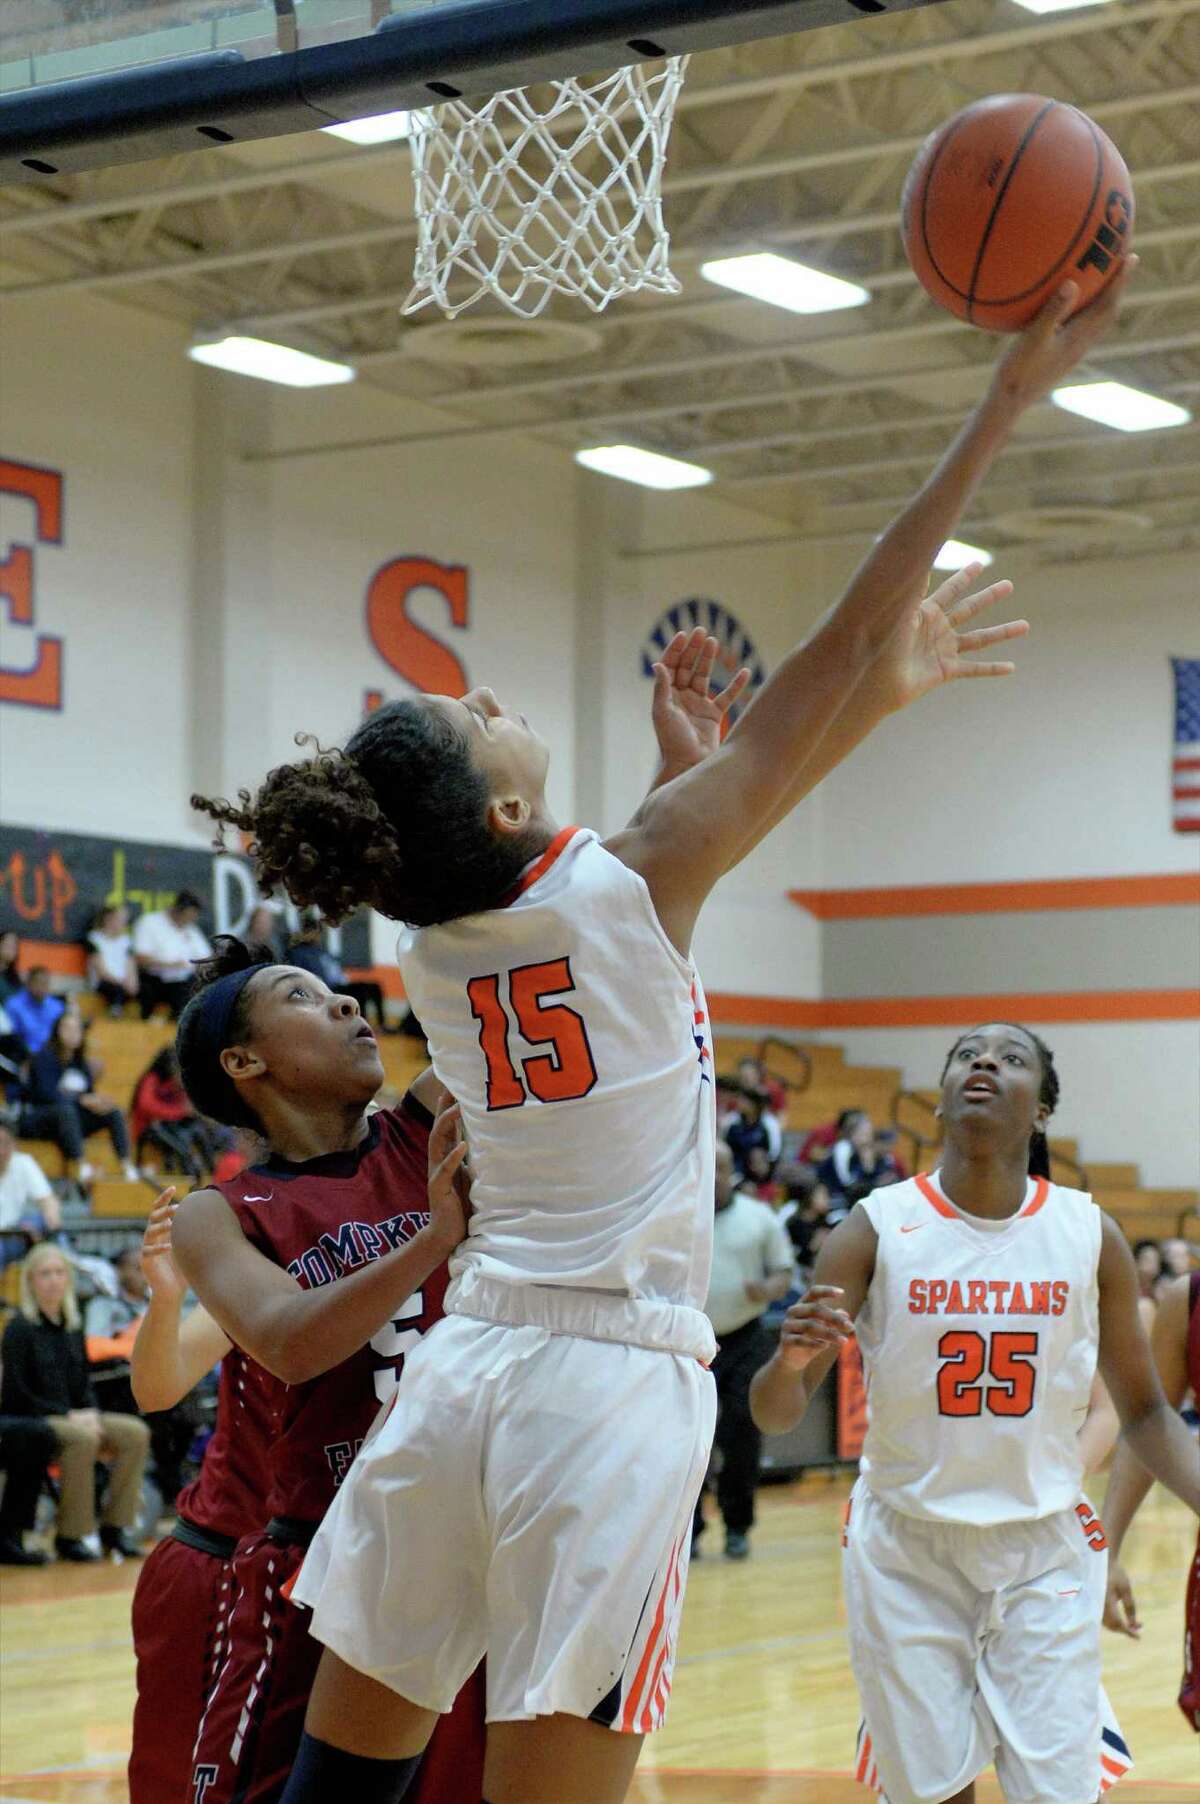 Priscilla Williams (15) of Seven Lakes attempts a reverse lay-up during the second half of a girls basketball game between the Seven Lakes Spartans and the Tompkins Falcons on Tuesday January 17, 2017 at Seven Lakes High School, Katy, TX.